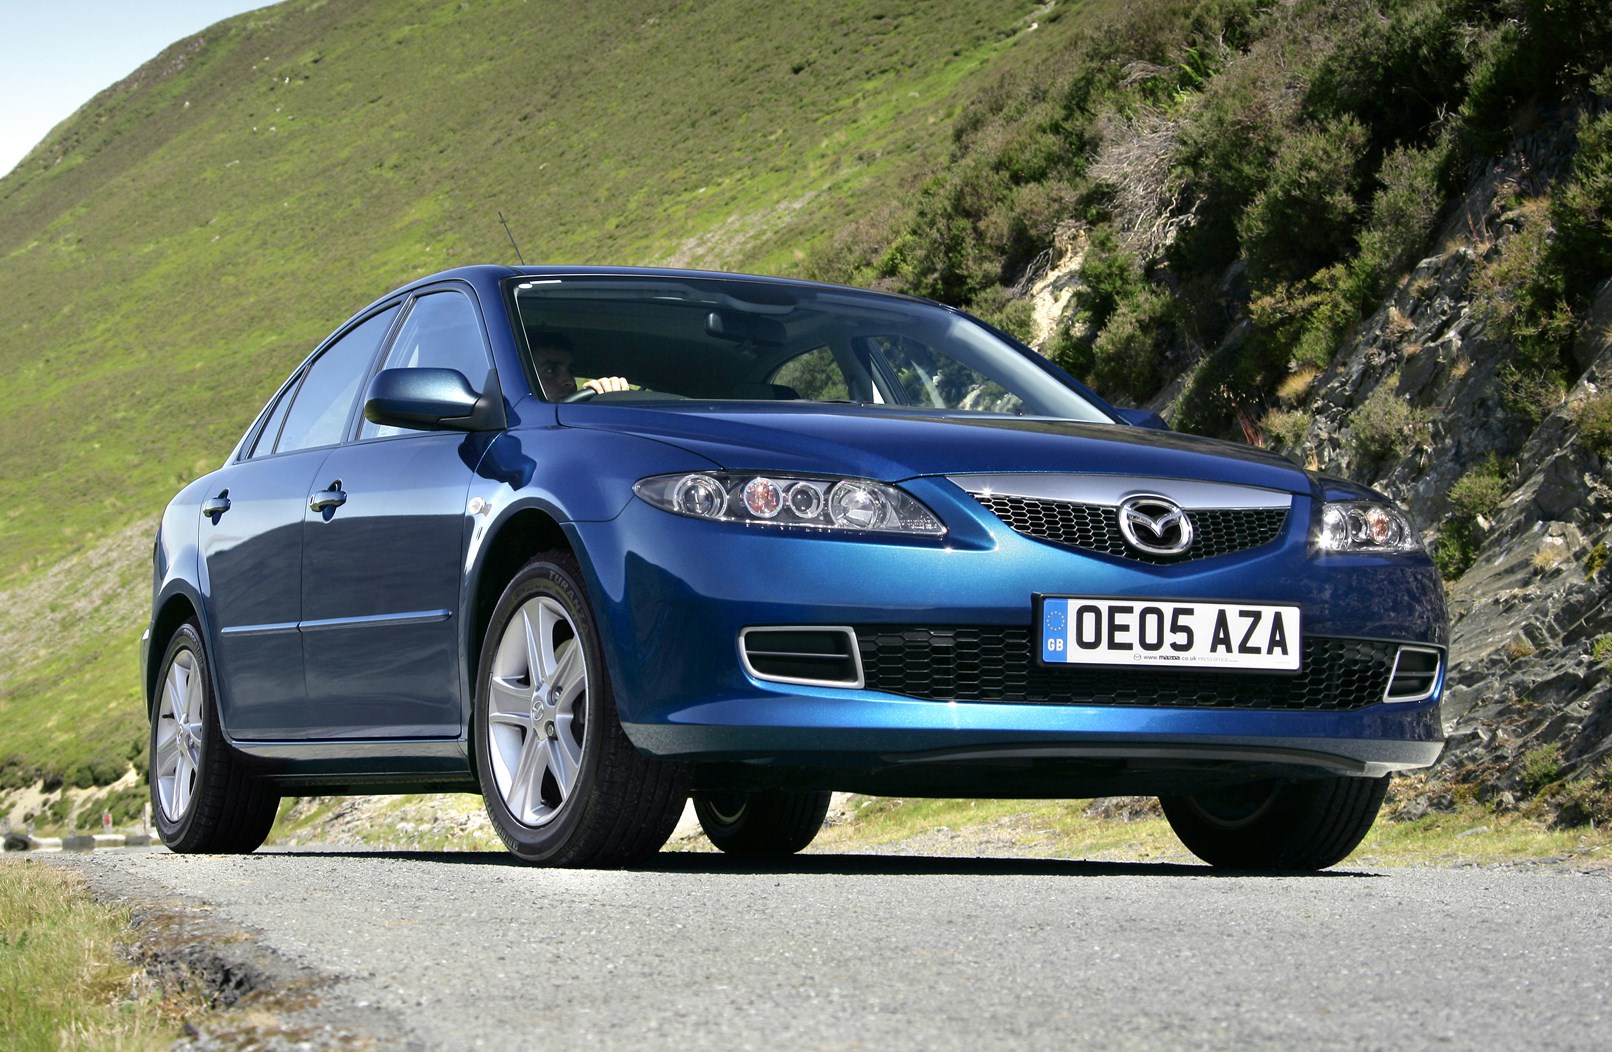 Used Mazda 6 Hatchback (2002 2007) Review Parkers